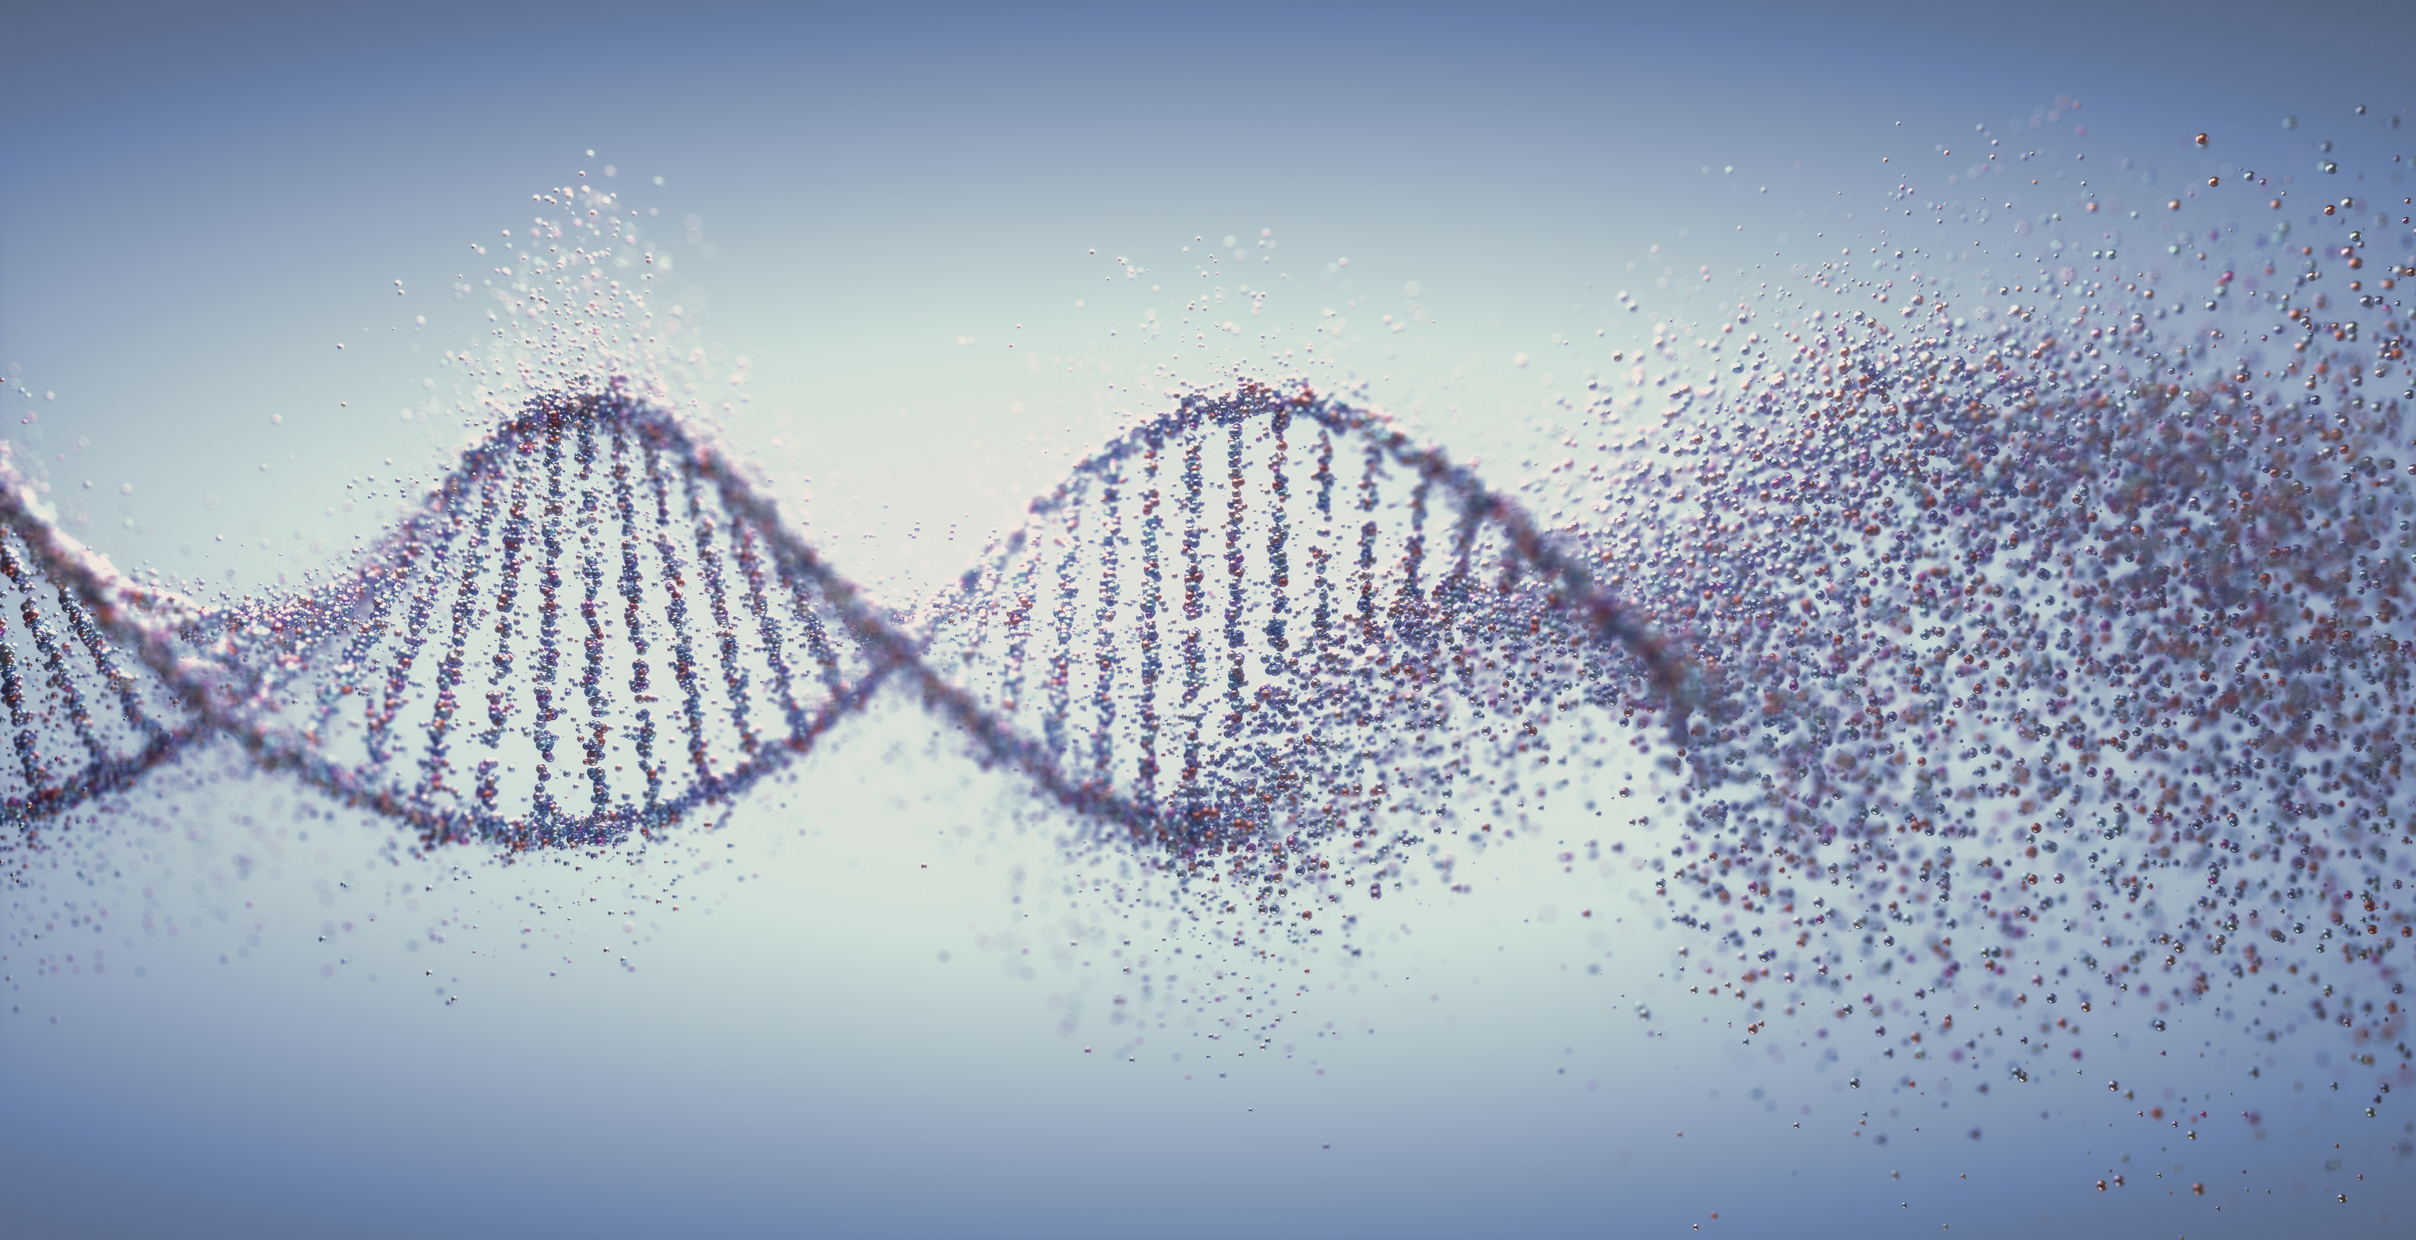 conceptual illustration shows dna strand dissolving at one end